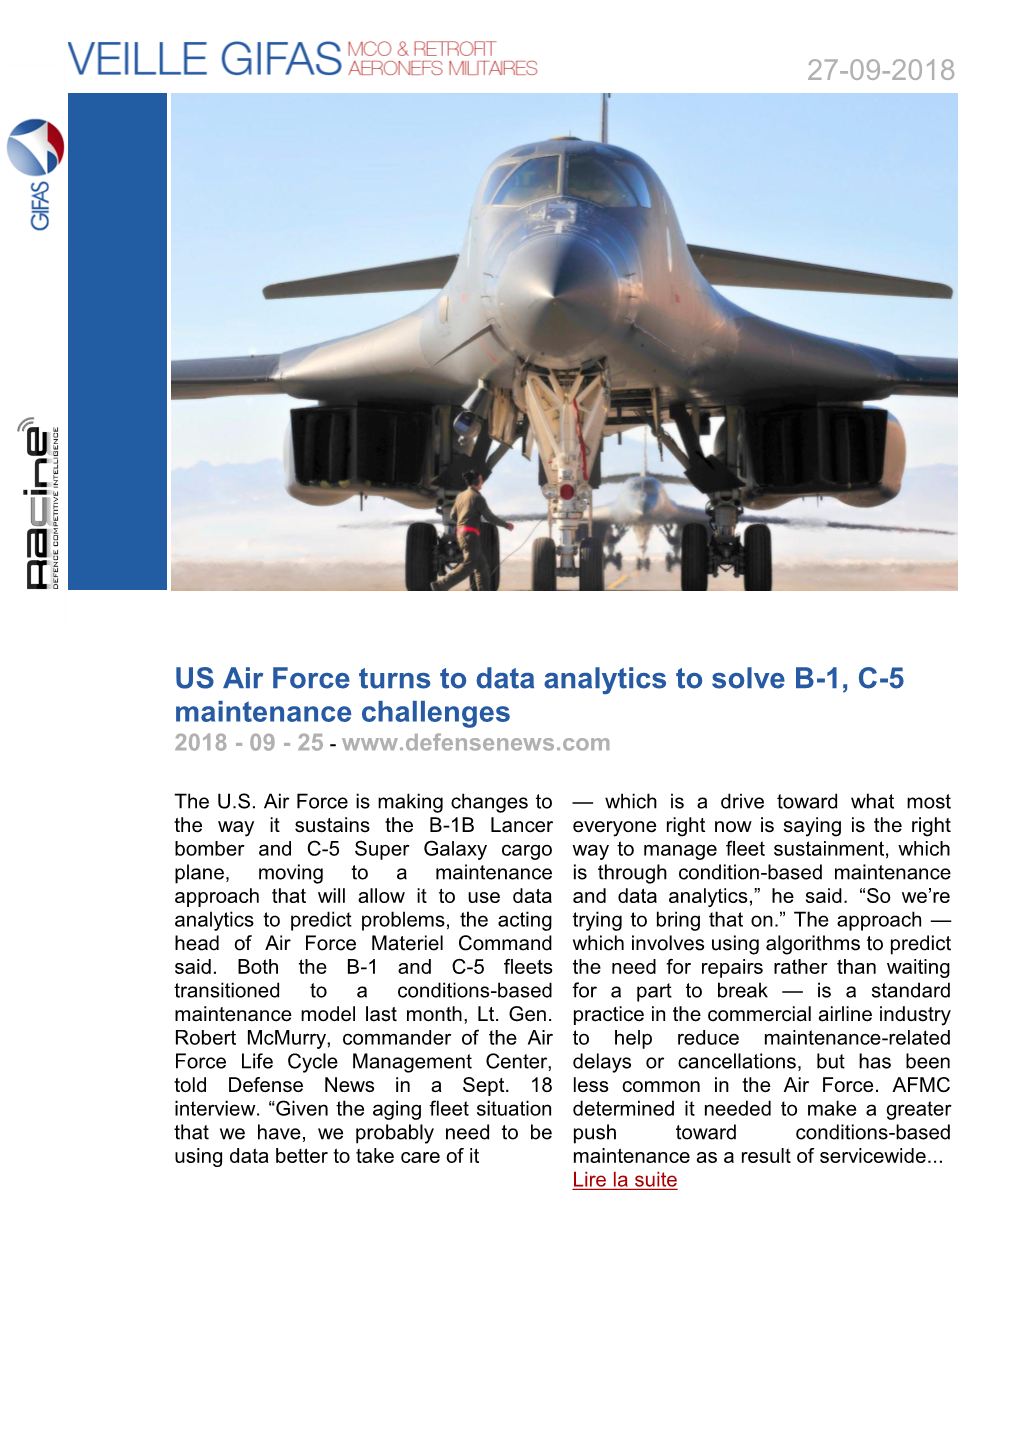 27-09-2018 US Air Force Turns to Data Analytics to Solve B-1, C-5